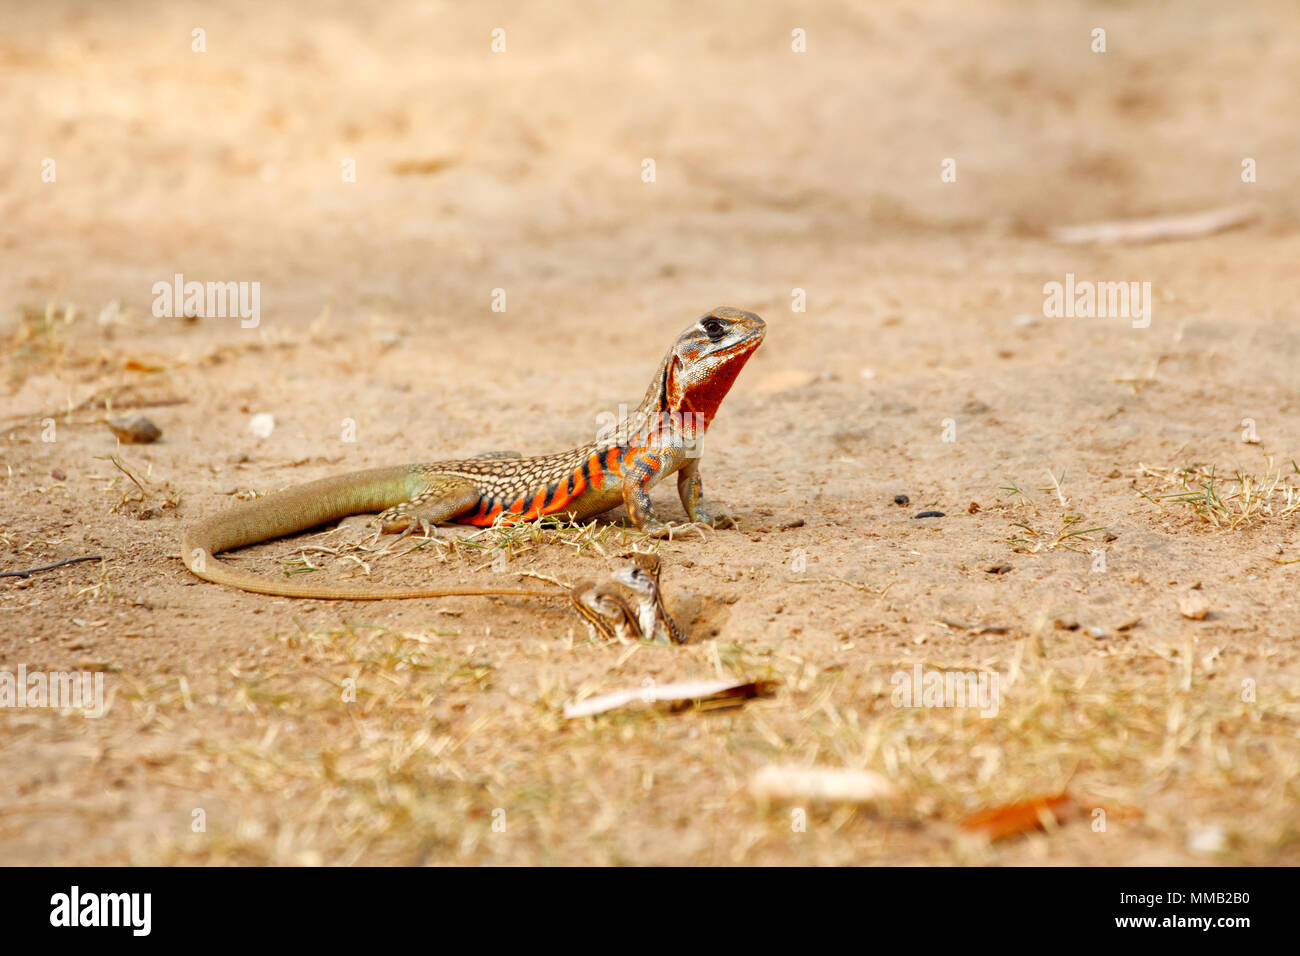 Common butterfly lizard /Butterfly agama (Leiolepis belliana ssp. ocellata) stay near the burrow to protect its newborn Stock Photo